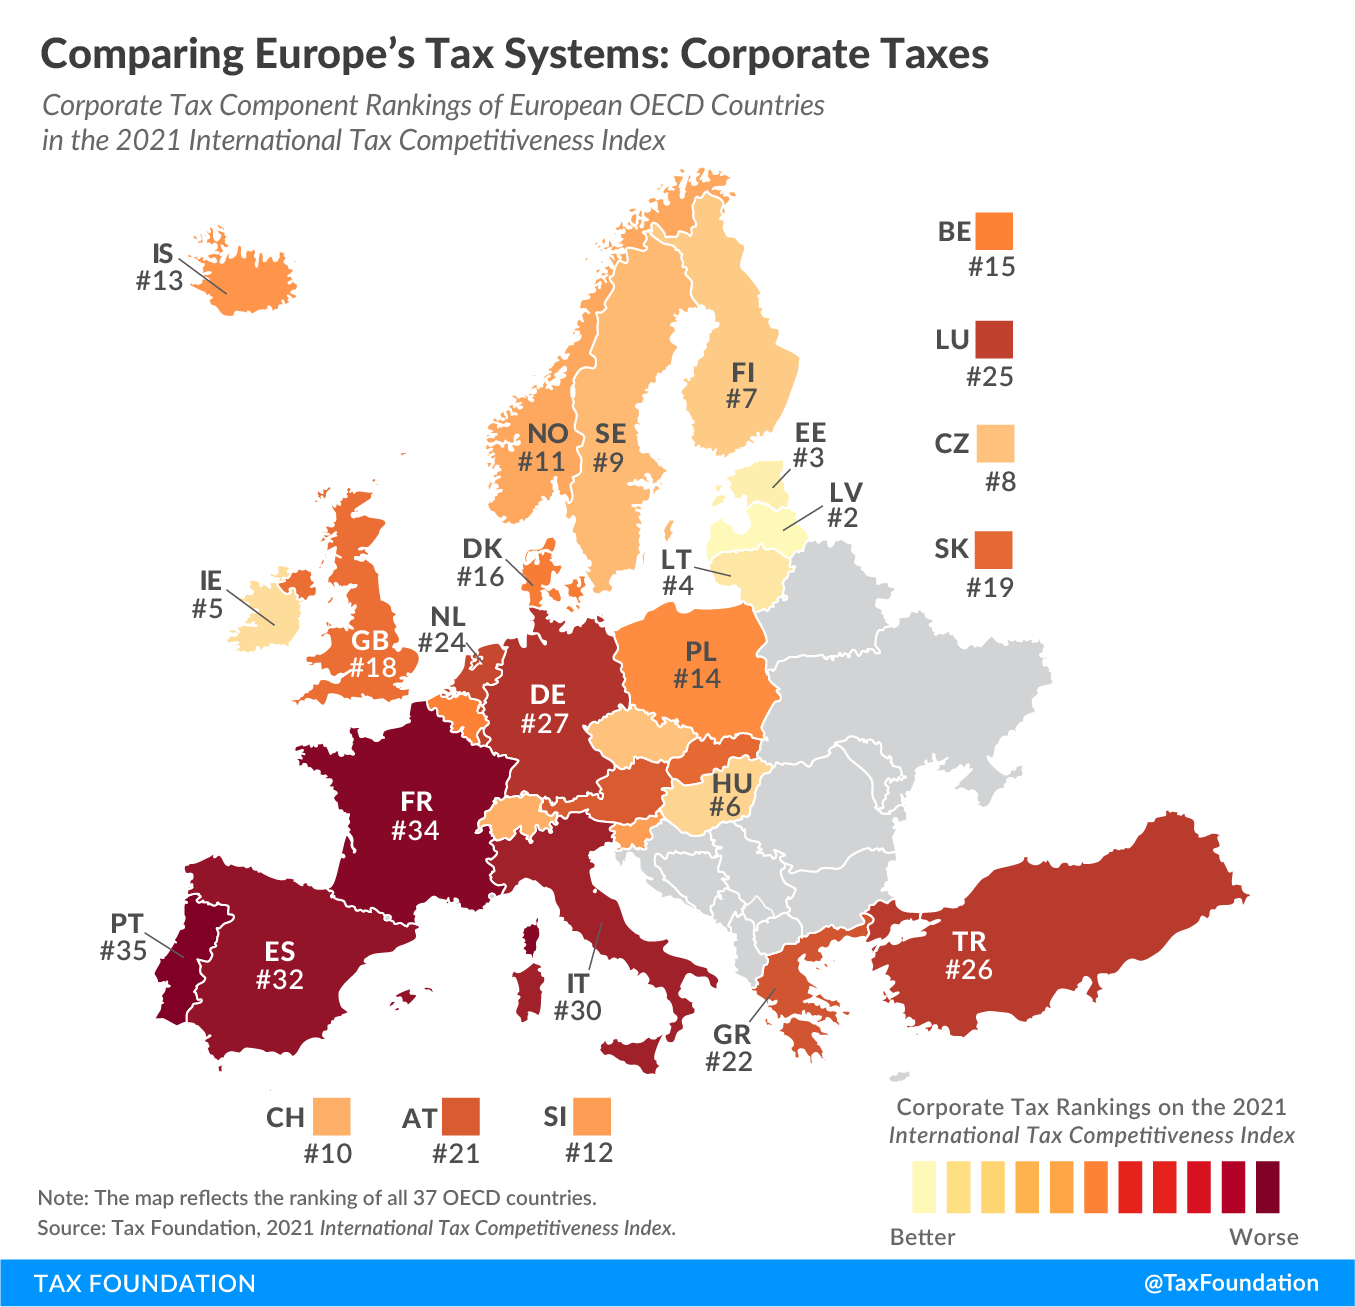 Comparing-Corporate-Tax-Systems-in-Europe-2021-Worst-Corporate-Tax-Systems-in-Europe-2021.png